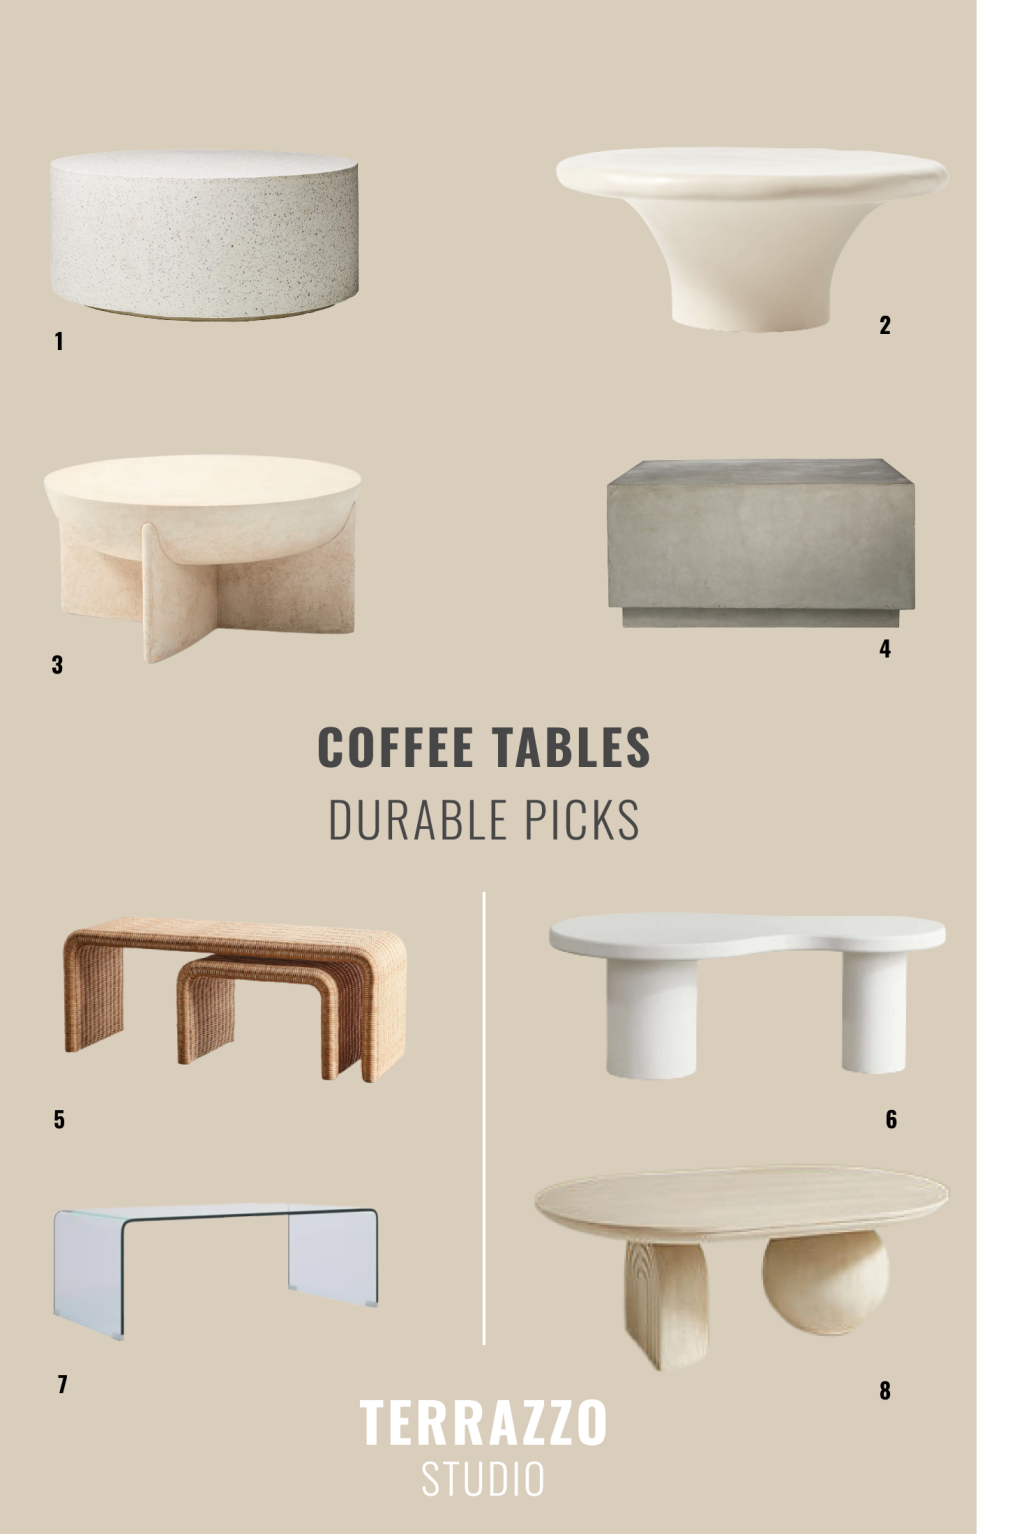 Table Talk: How to Find the Best Coffee Table for Your Living Space